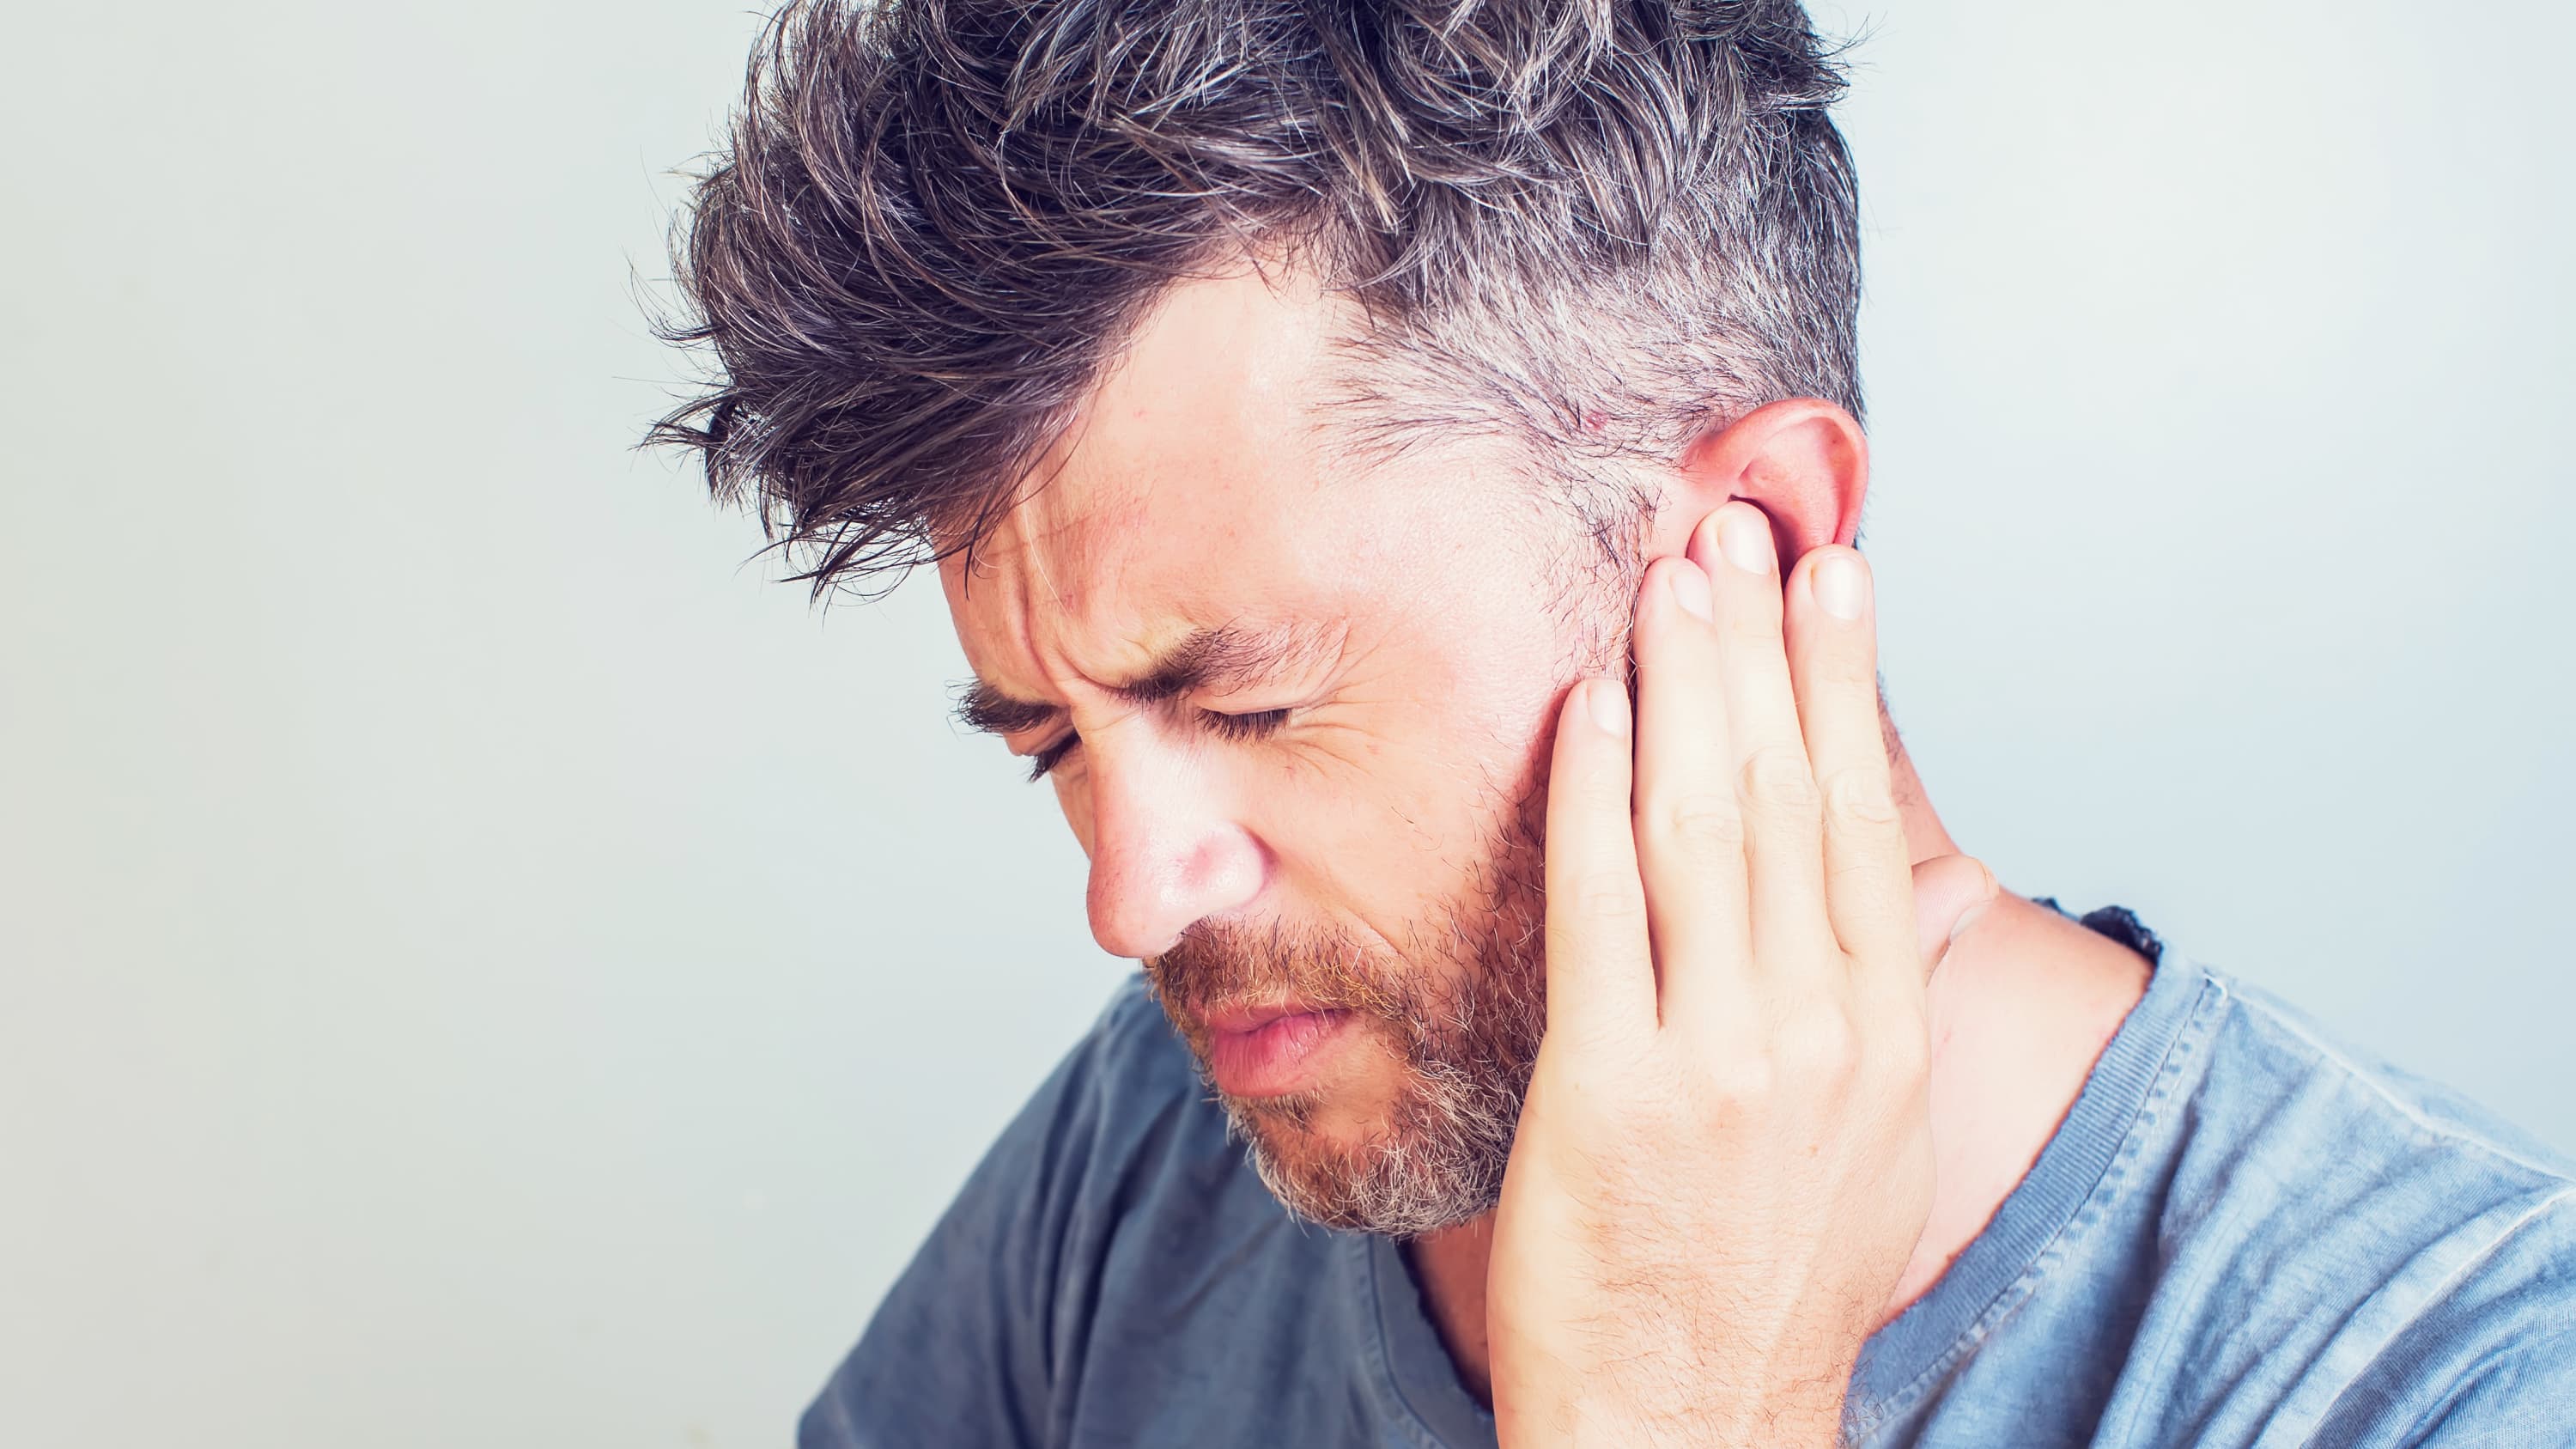 A man suffering from tinnitus